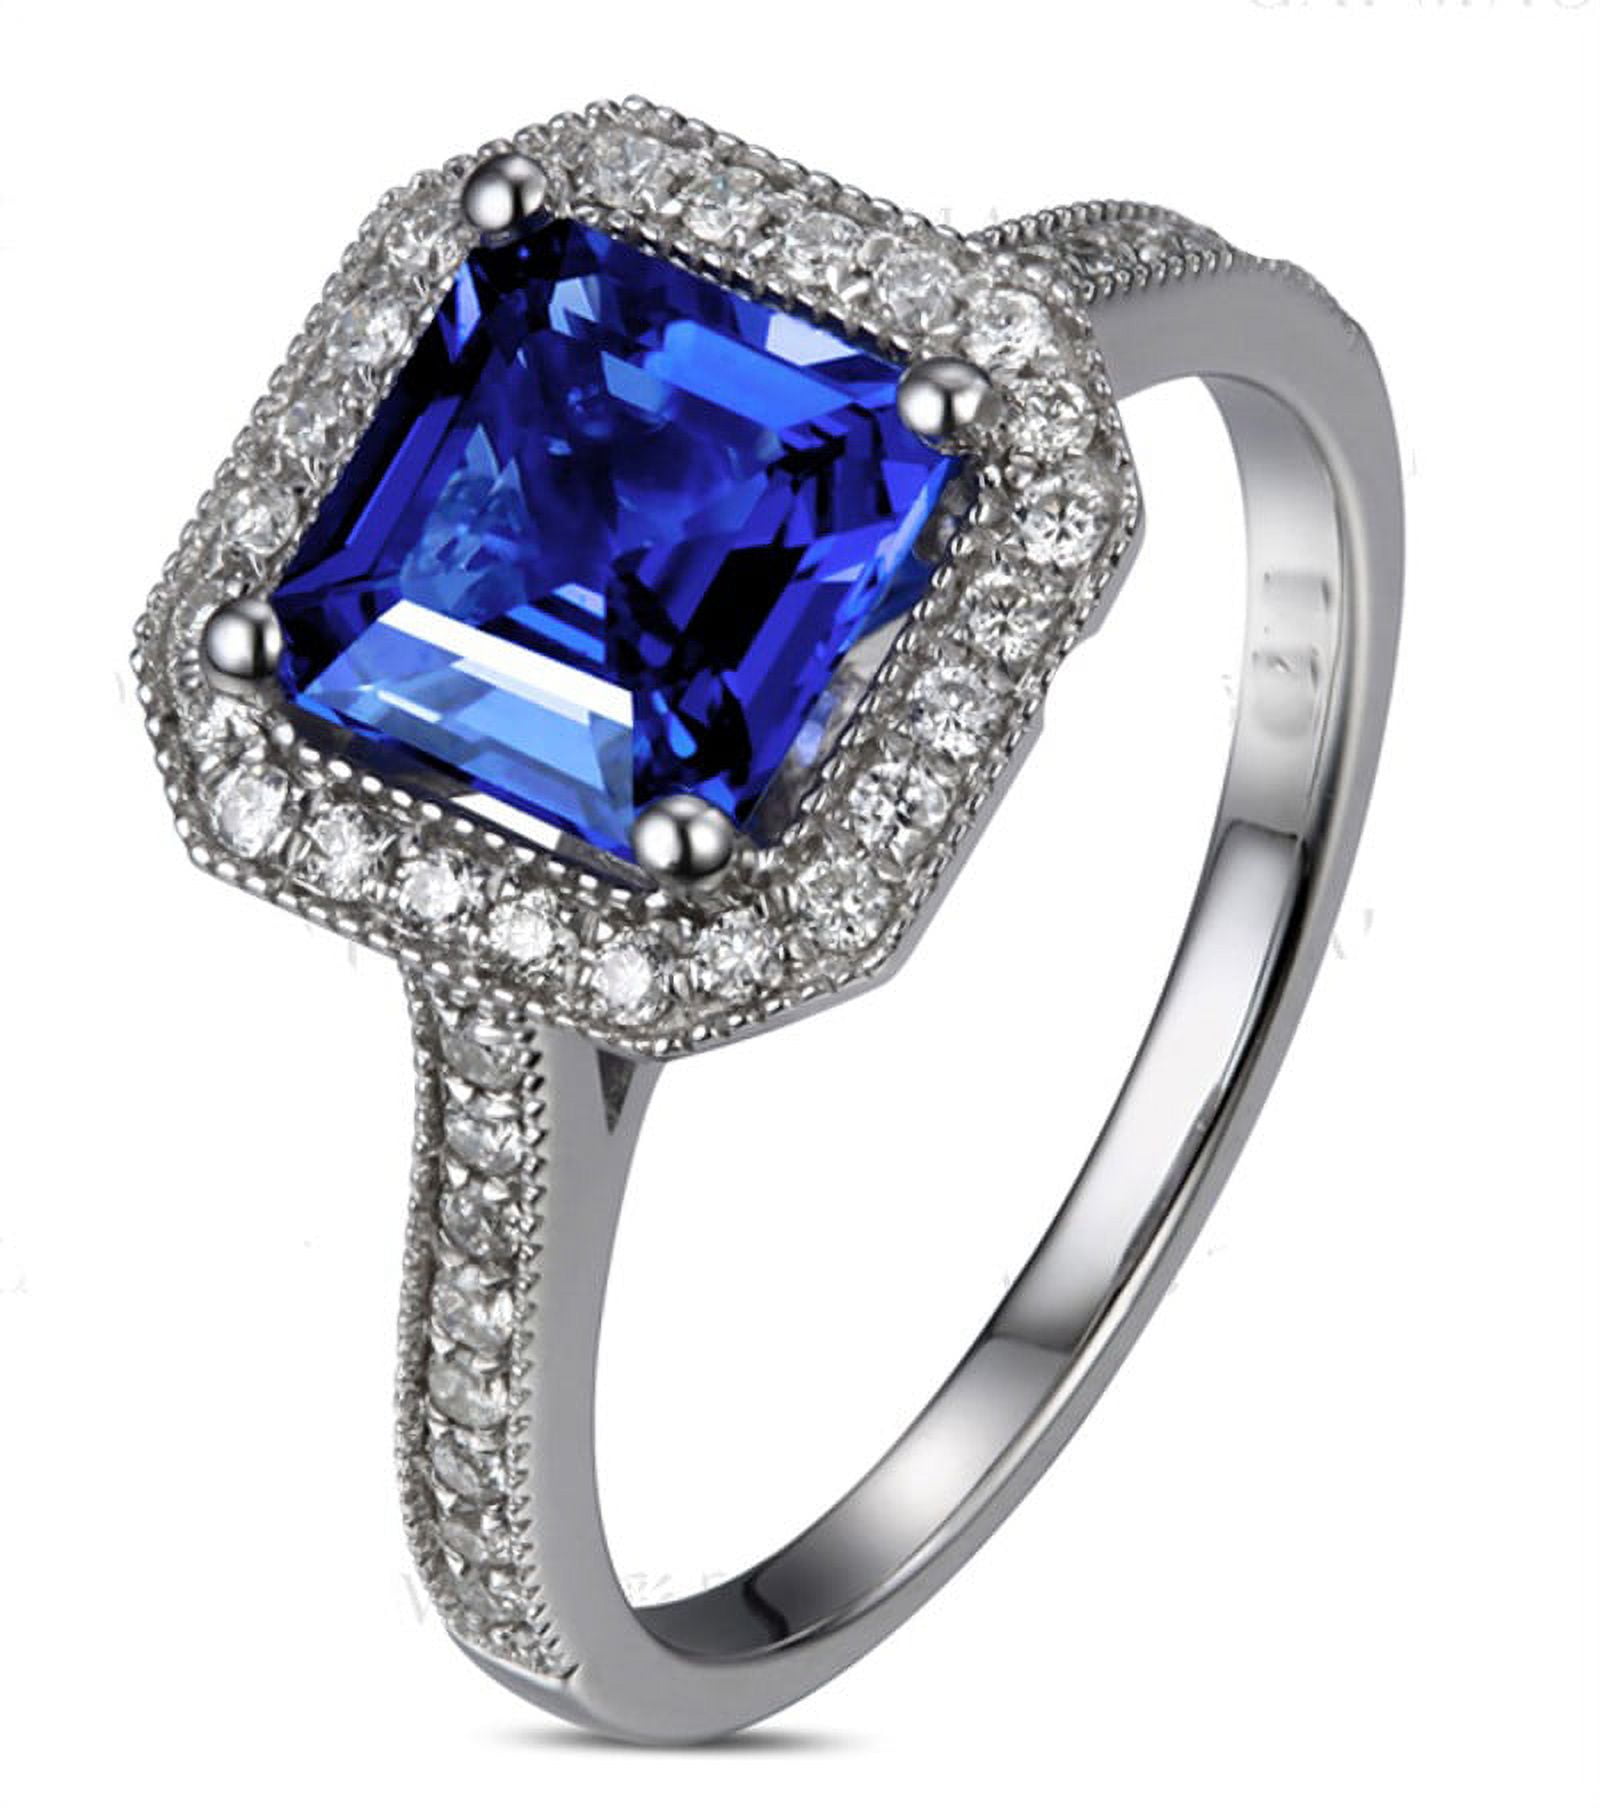 Antique 1 Carat princess cut Sapphire and Diamond Engagement Ring in ...